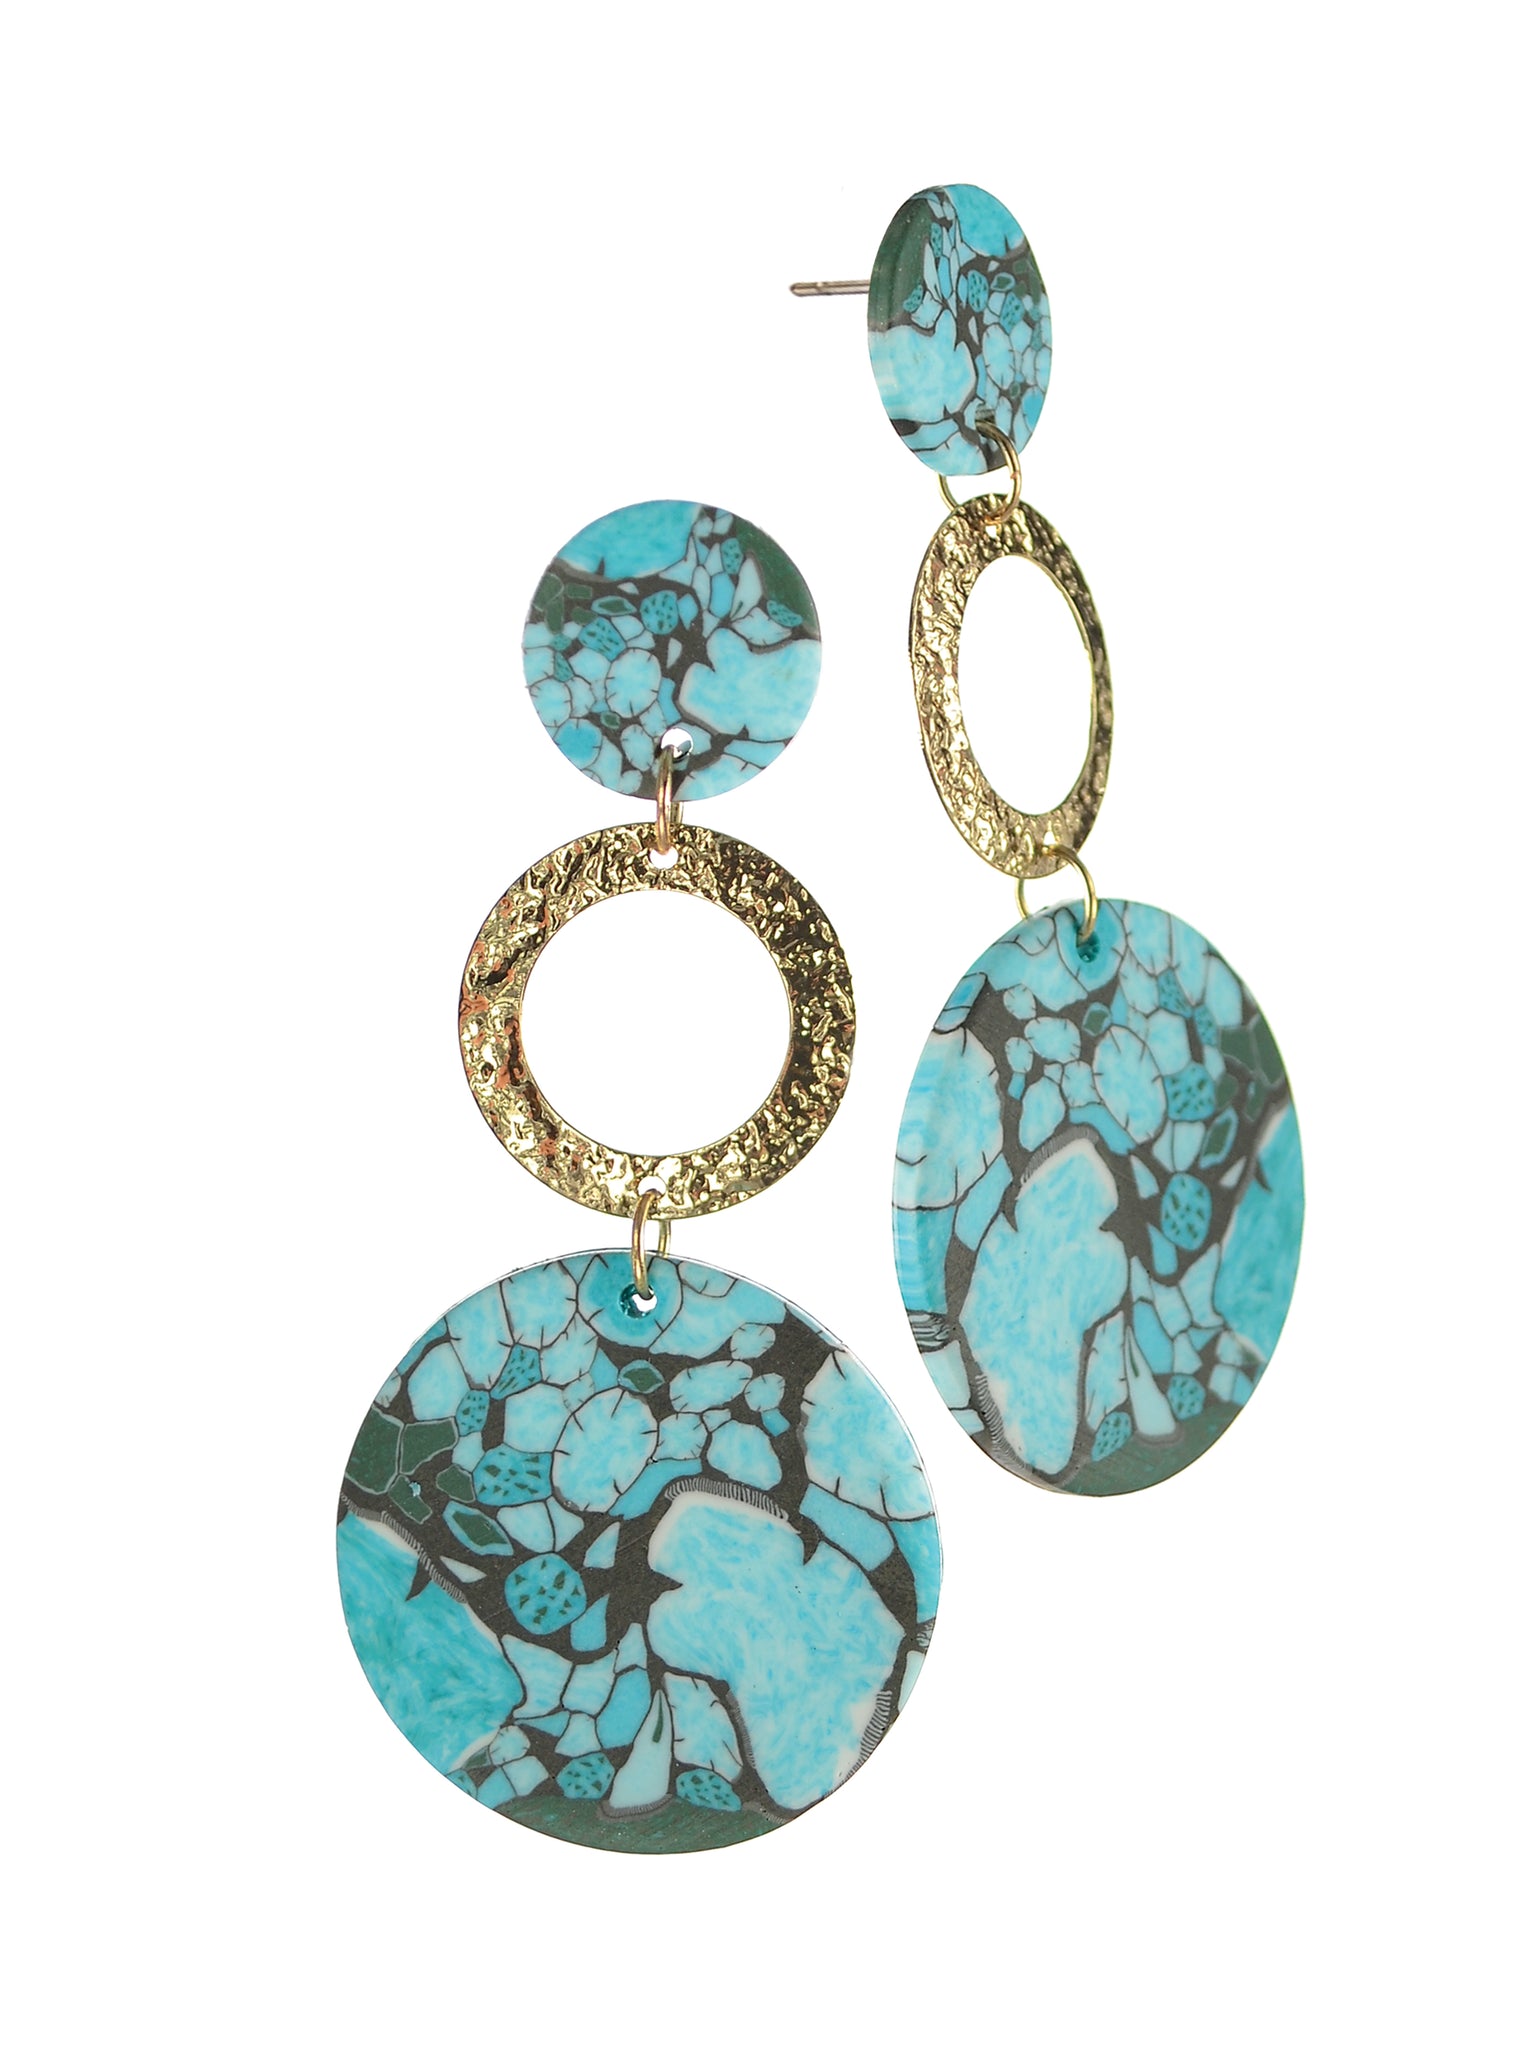 Turquoise and gold drop earrings